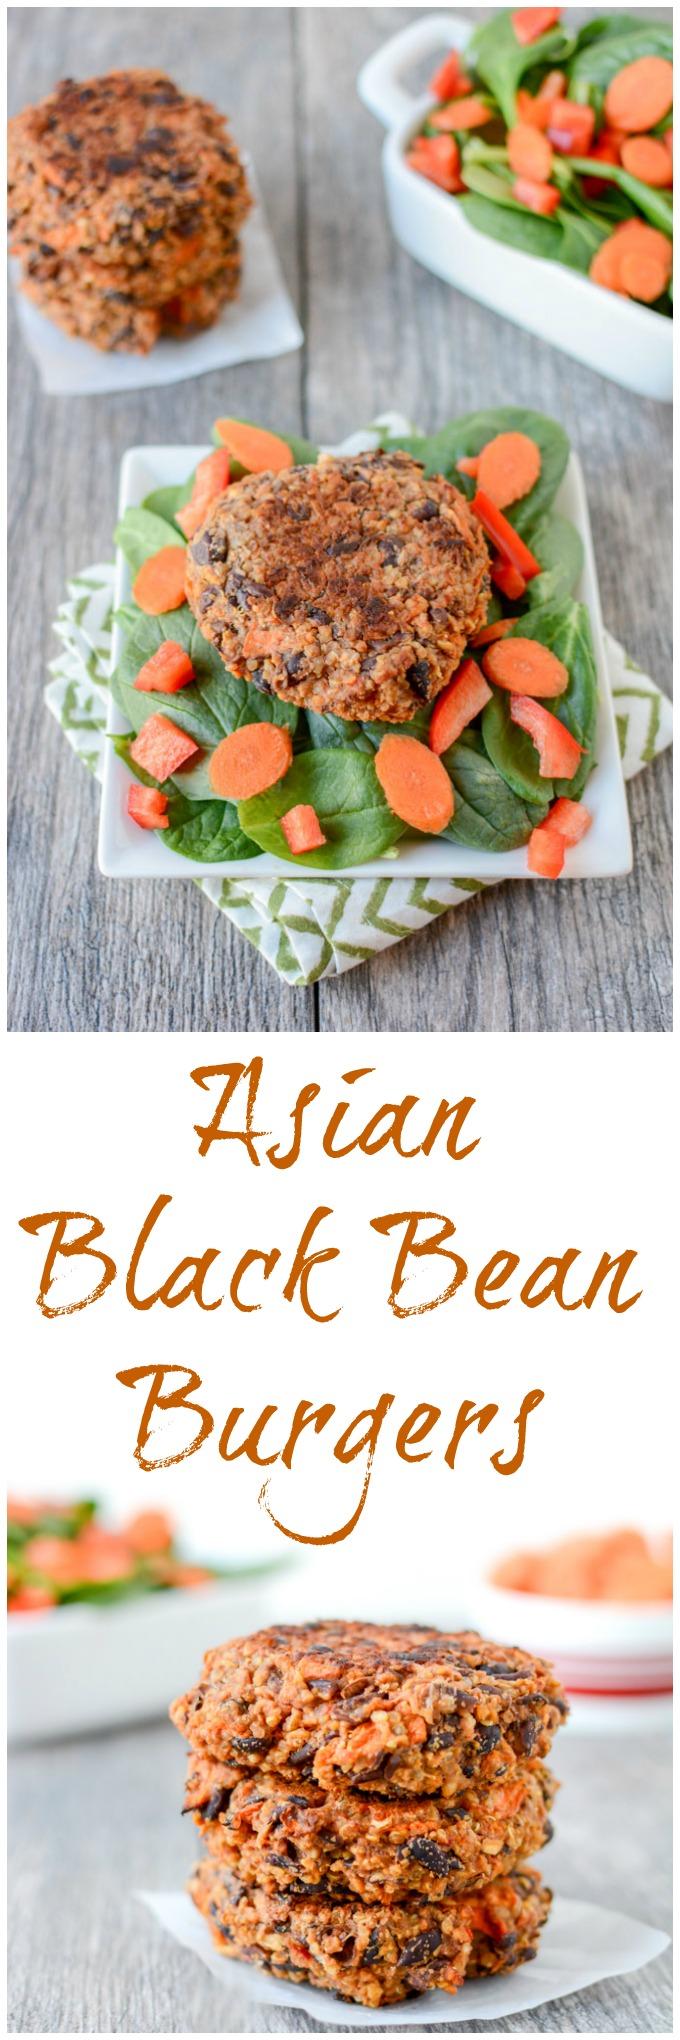 This recipe for Asian Black Bean Burgers is full of flavor and perfect for food prep. The burgers are packed with protein and fiber and taste great with a salad for a healthy, vegan lunch!